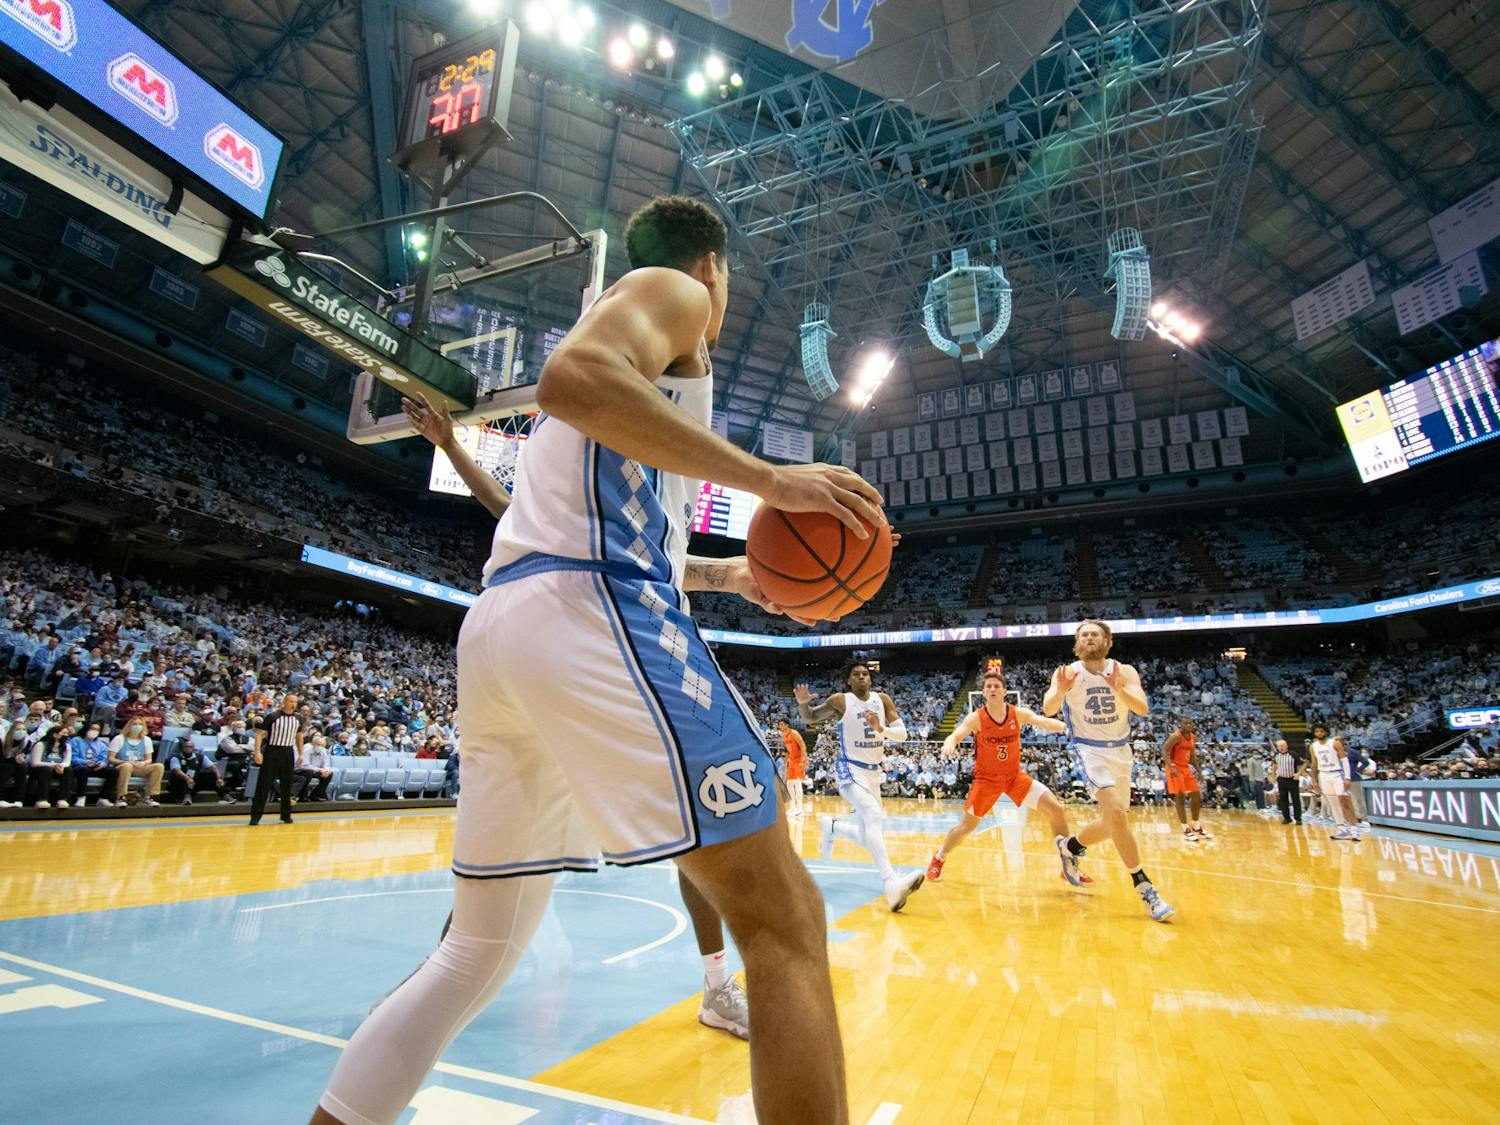 UNC junior forward Justin McKoy throwing the ball in during UNC Men's basketball's home game against Virginia Tech on Monday, Jan. 24, 2022, at the Dean Smith Center.